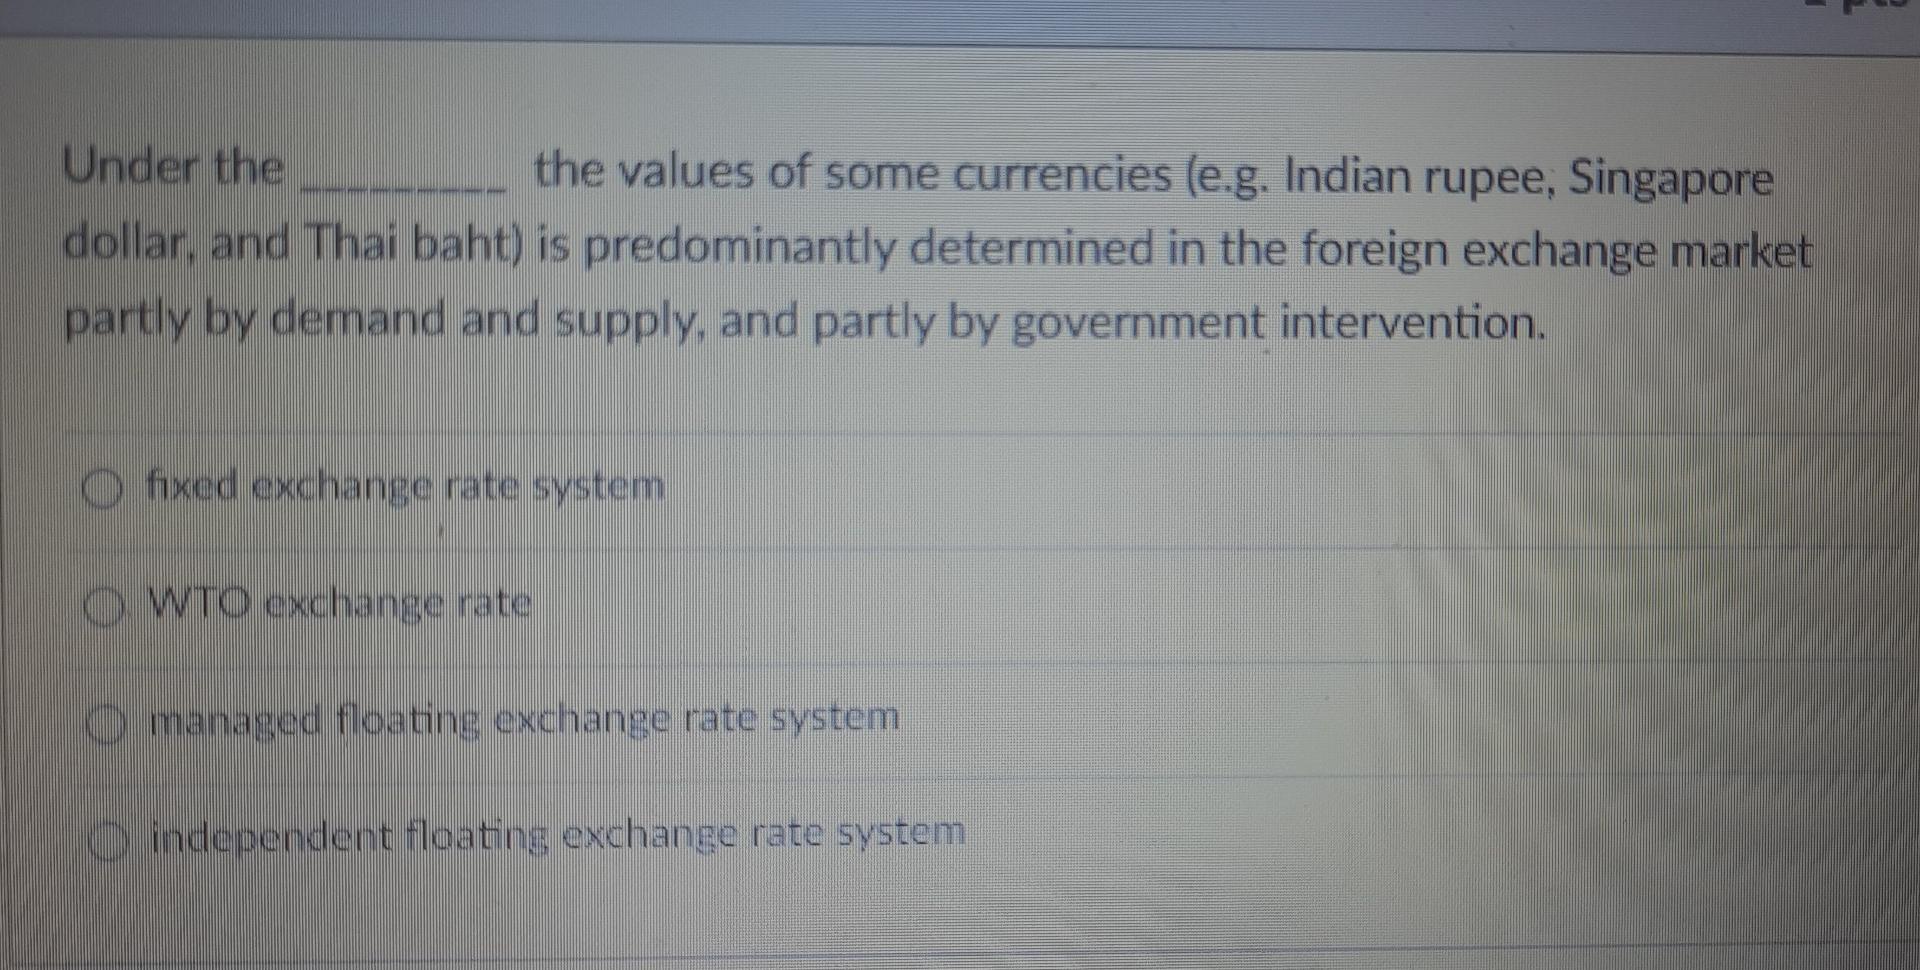 The Secret Behind Who Determines Exchange Rates in India